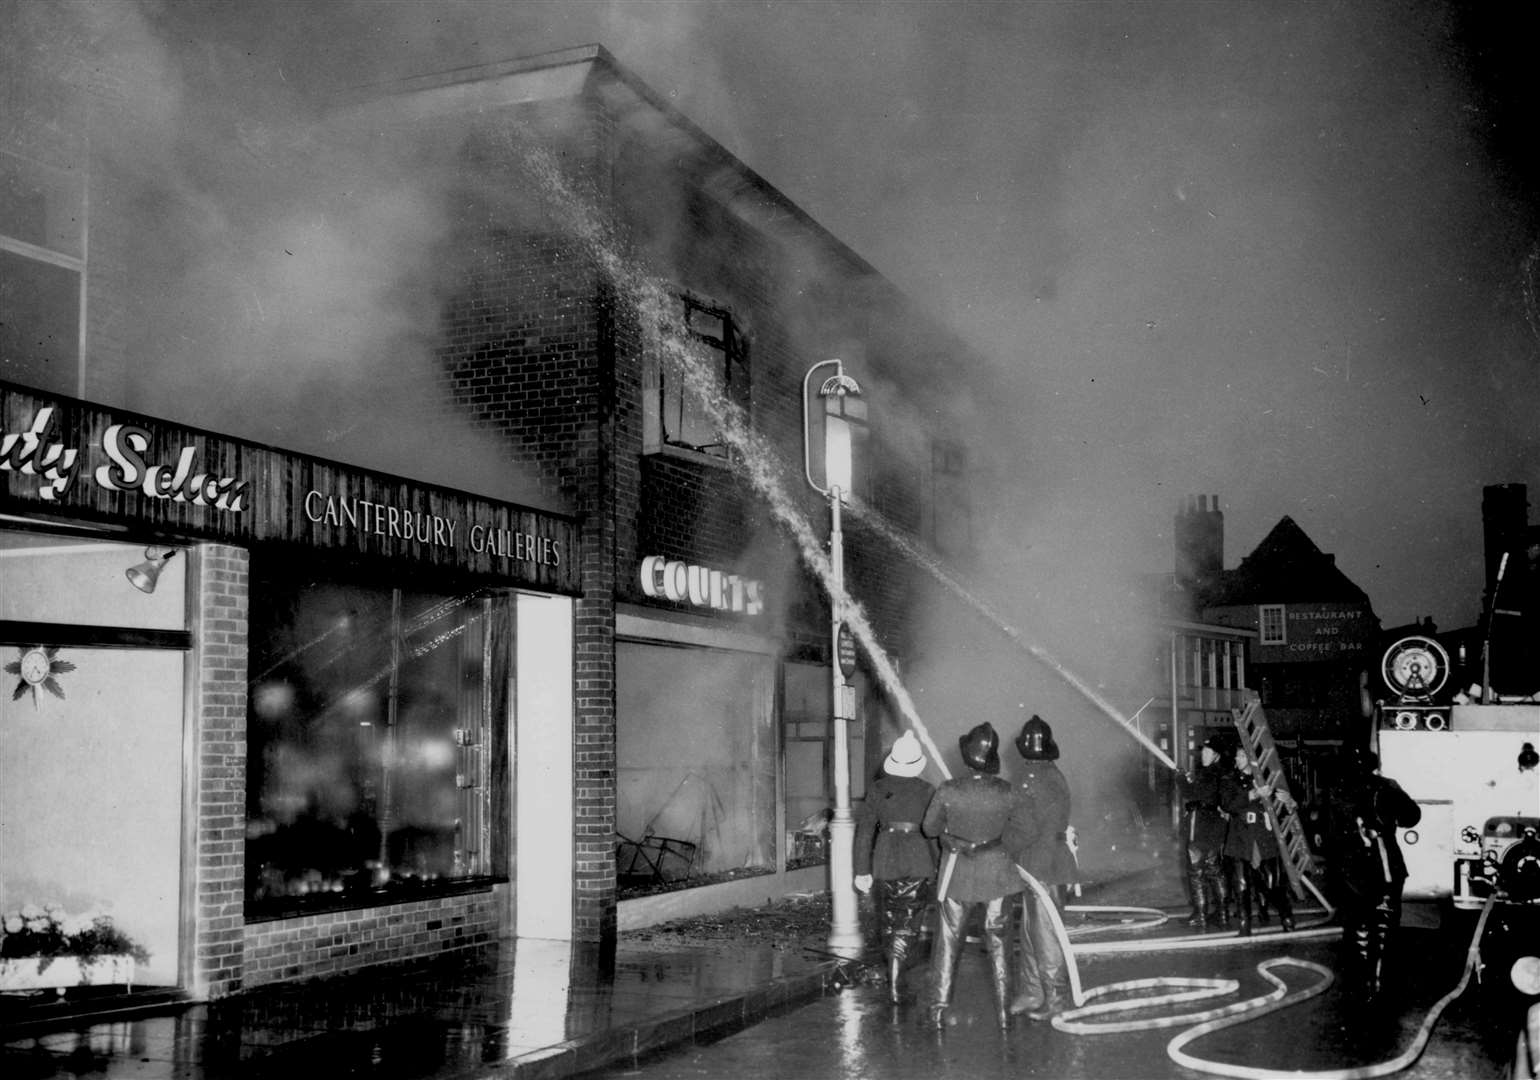 A blaze at Courts furniture showrooms and store in Burgate in 1964 (Picture: Images of Canterbury)